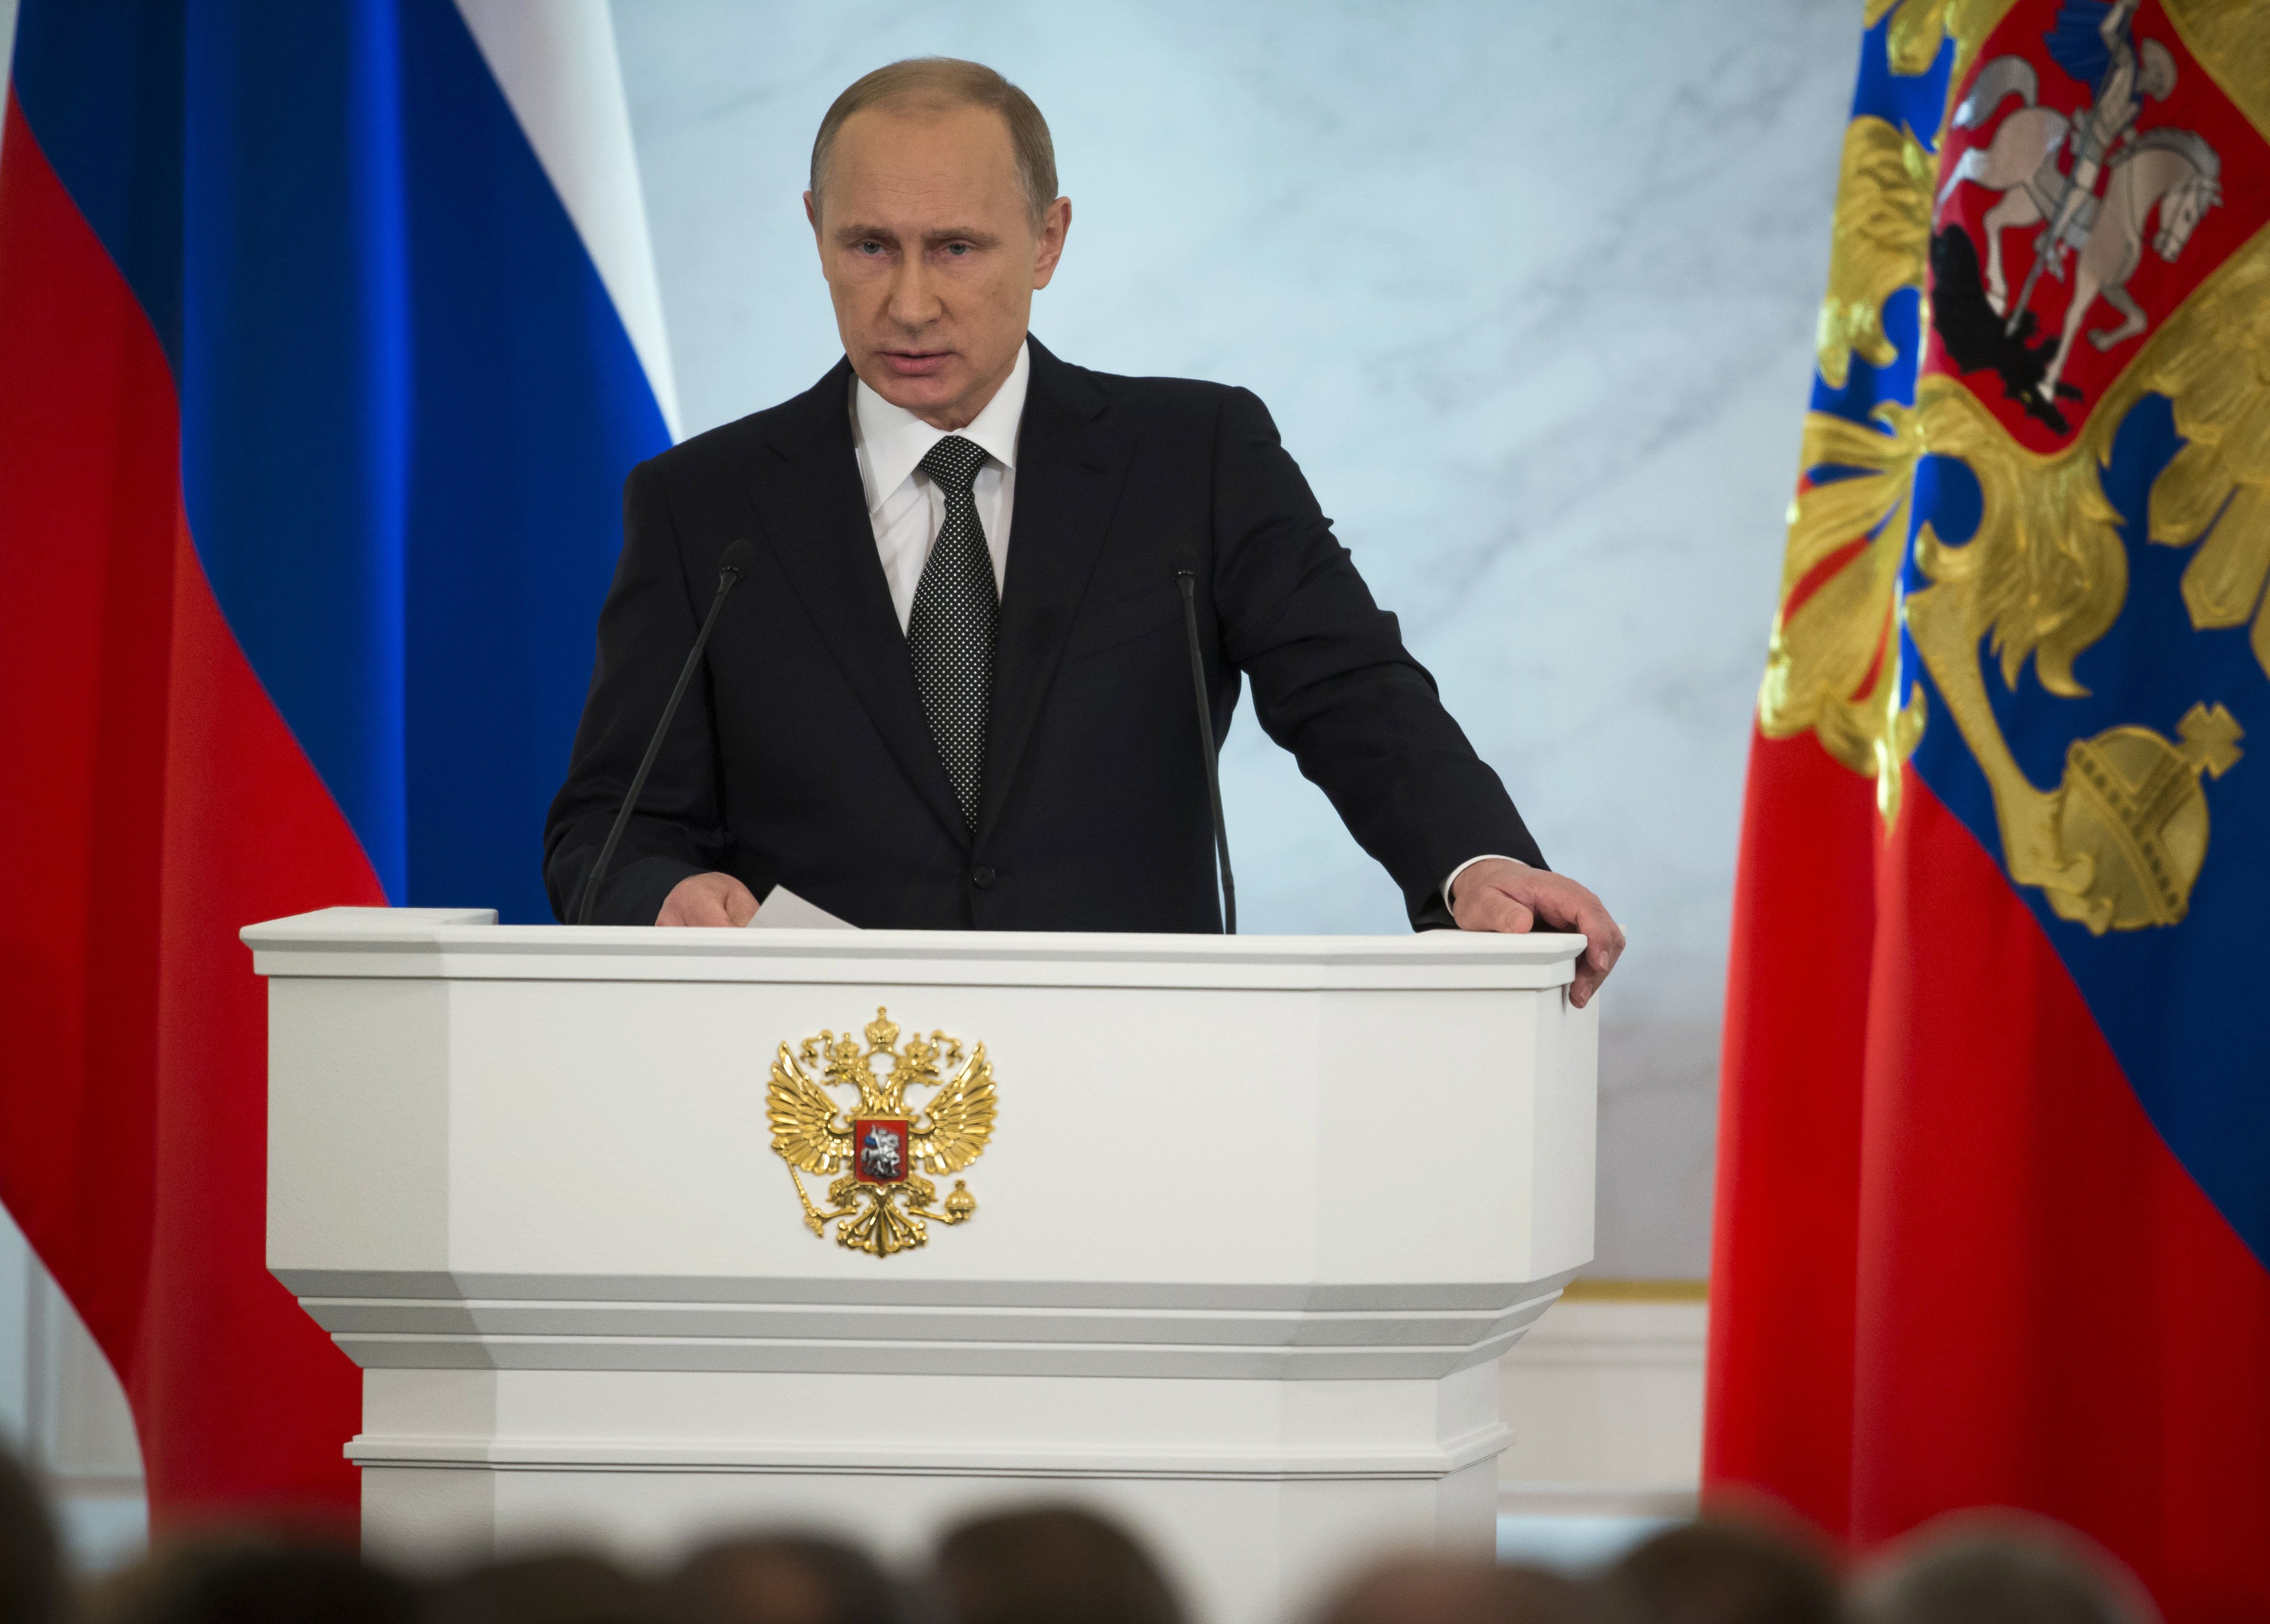 Russian President Vladimir Putin gives his annual state of the nation address in the Kremlin in Moscow on Dec. 4, 2014.